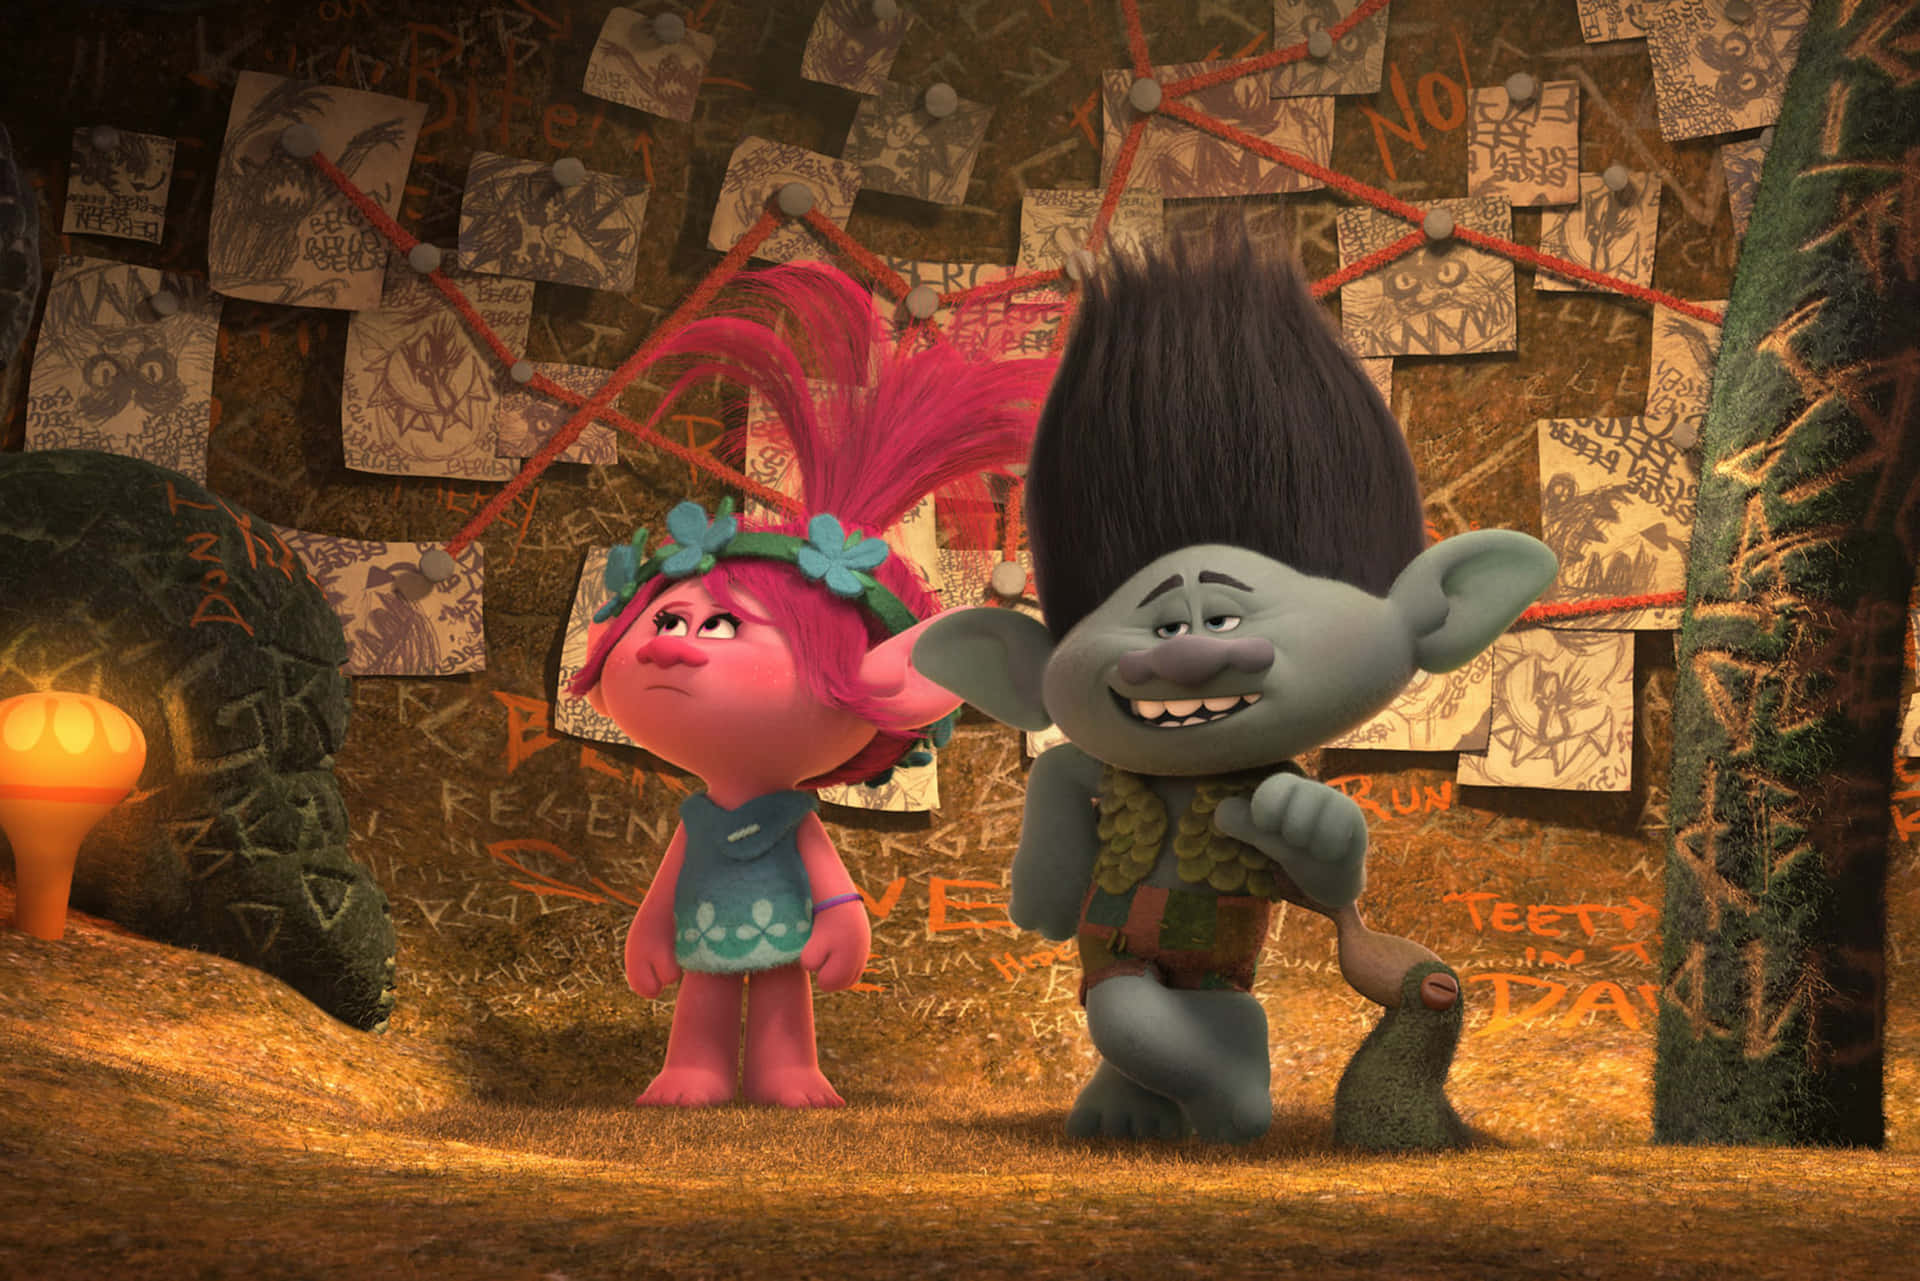 A Parade of Lovable Trolls